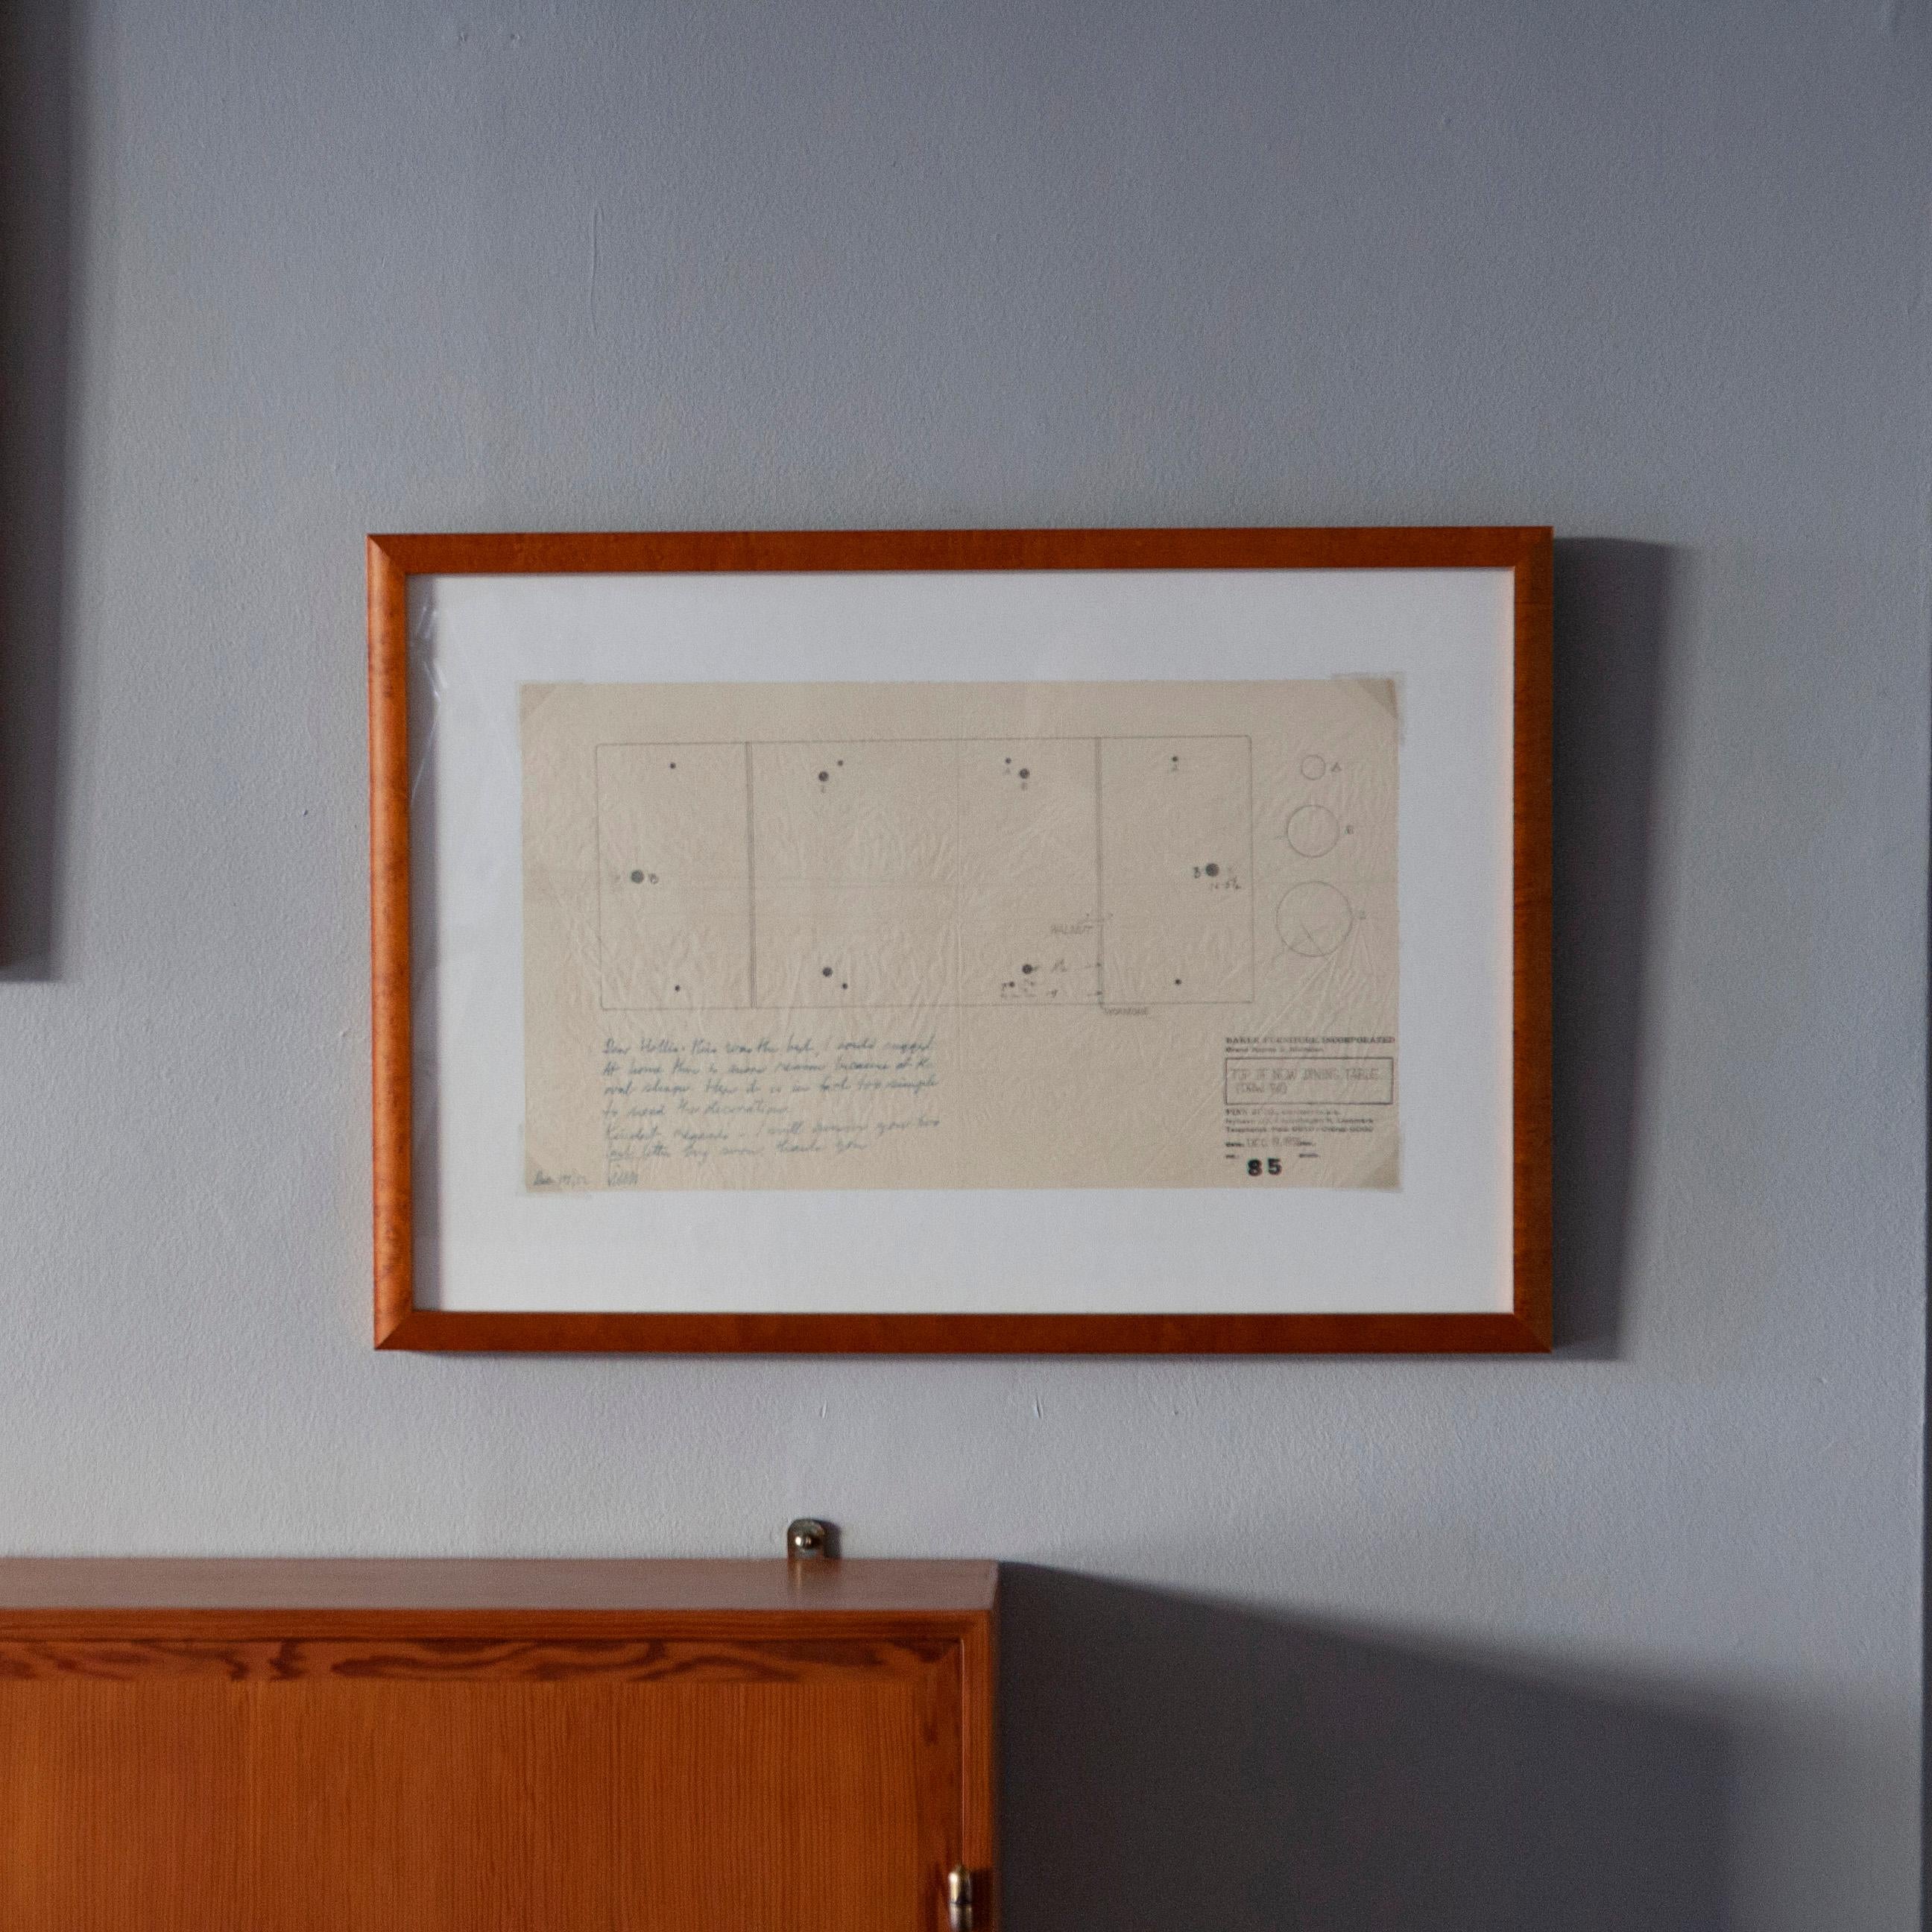 This is an example of a hand-drawn scaled drawing of the ‘Top of New Dining Table (DRW.79)’, 17th December 1952. The drawings depicts the top view of what seems to be a ‘simplified’ version of Finn Juhl’s Silver Table, or more commonly known as the